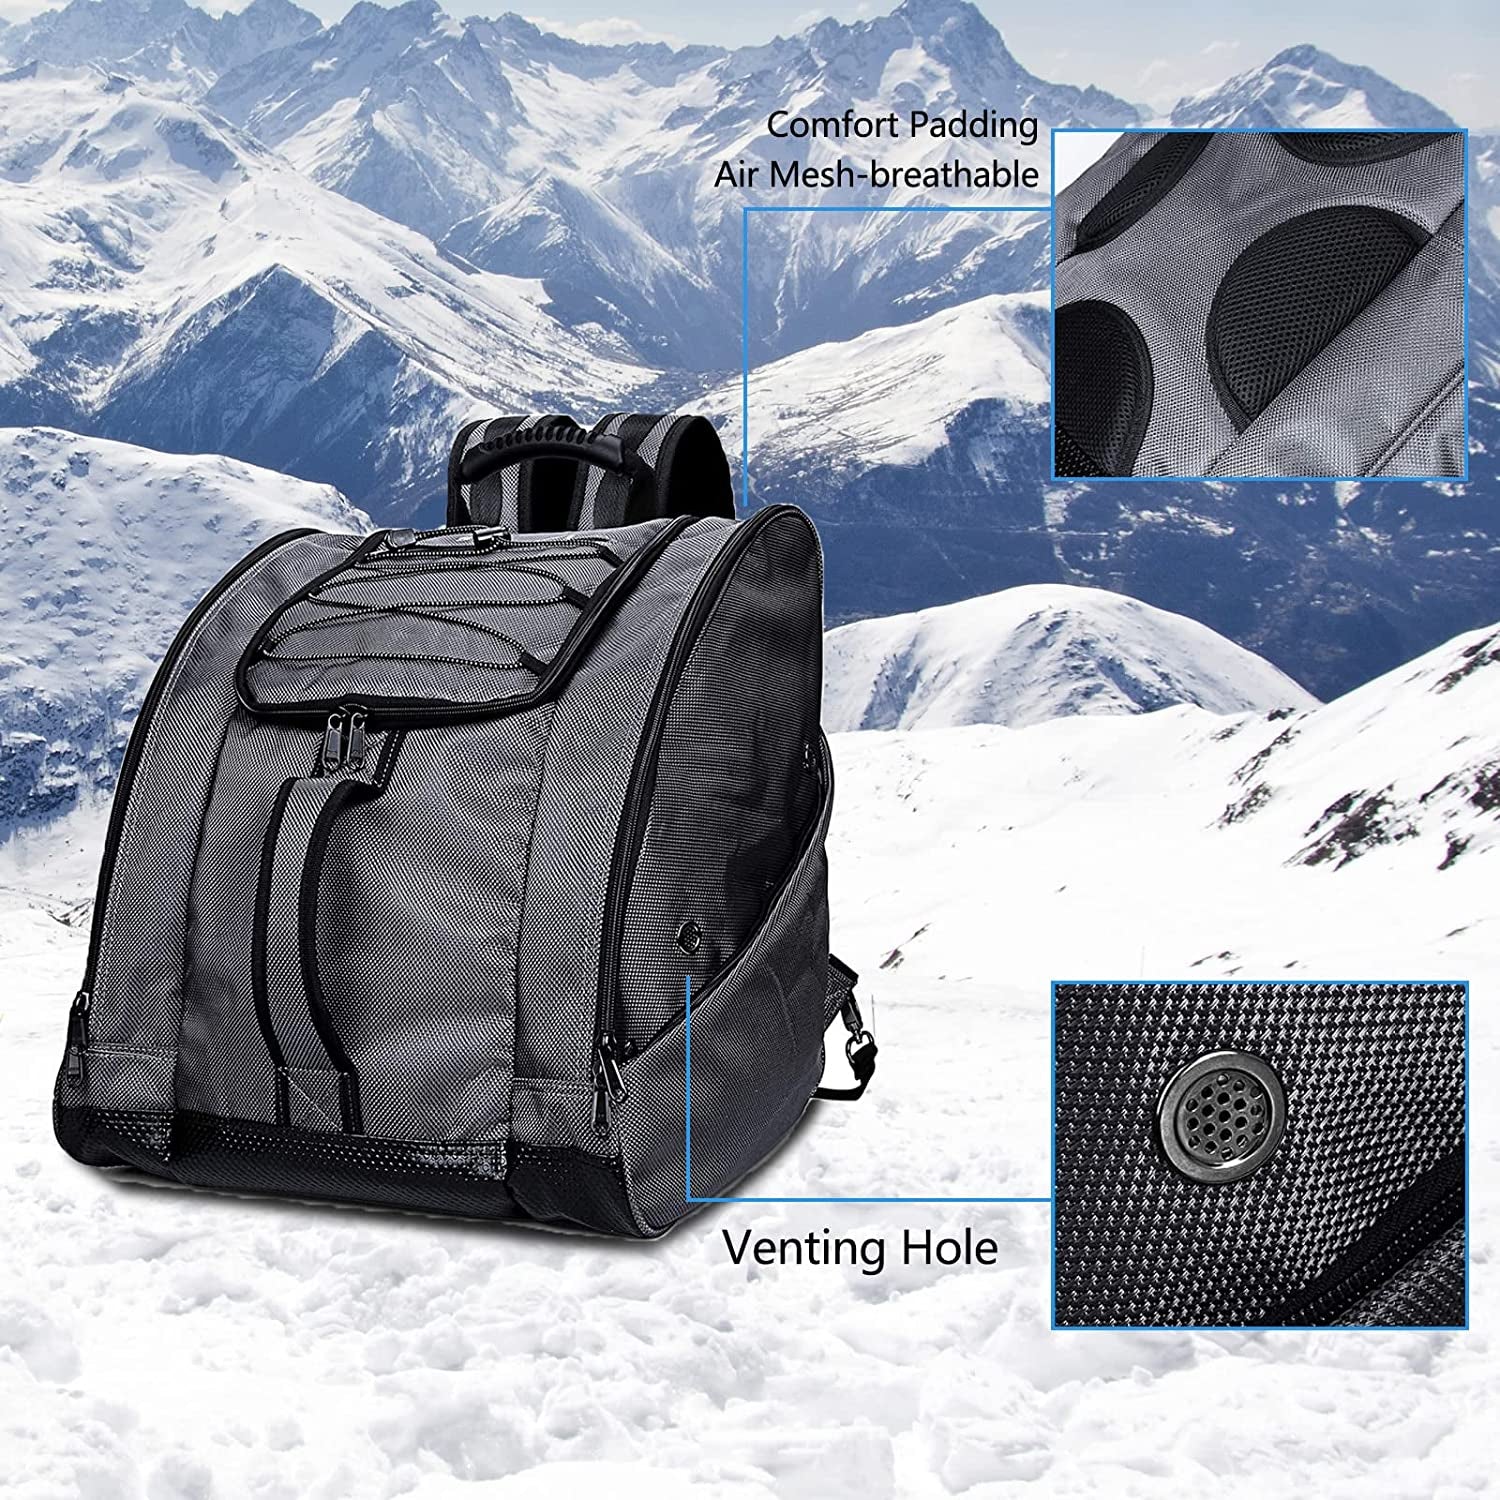 Yumykit Ski Boot Bag - Ski Boots and Snowboard Boots Bag, Excellent for Travel with Waterproof Exterior & Bottom - for Men, Women and Youth